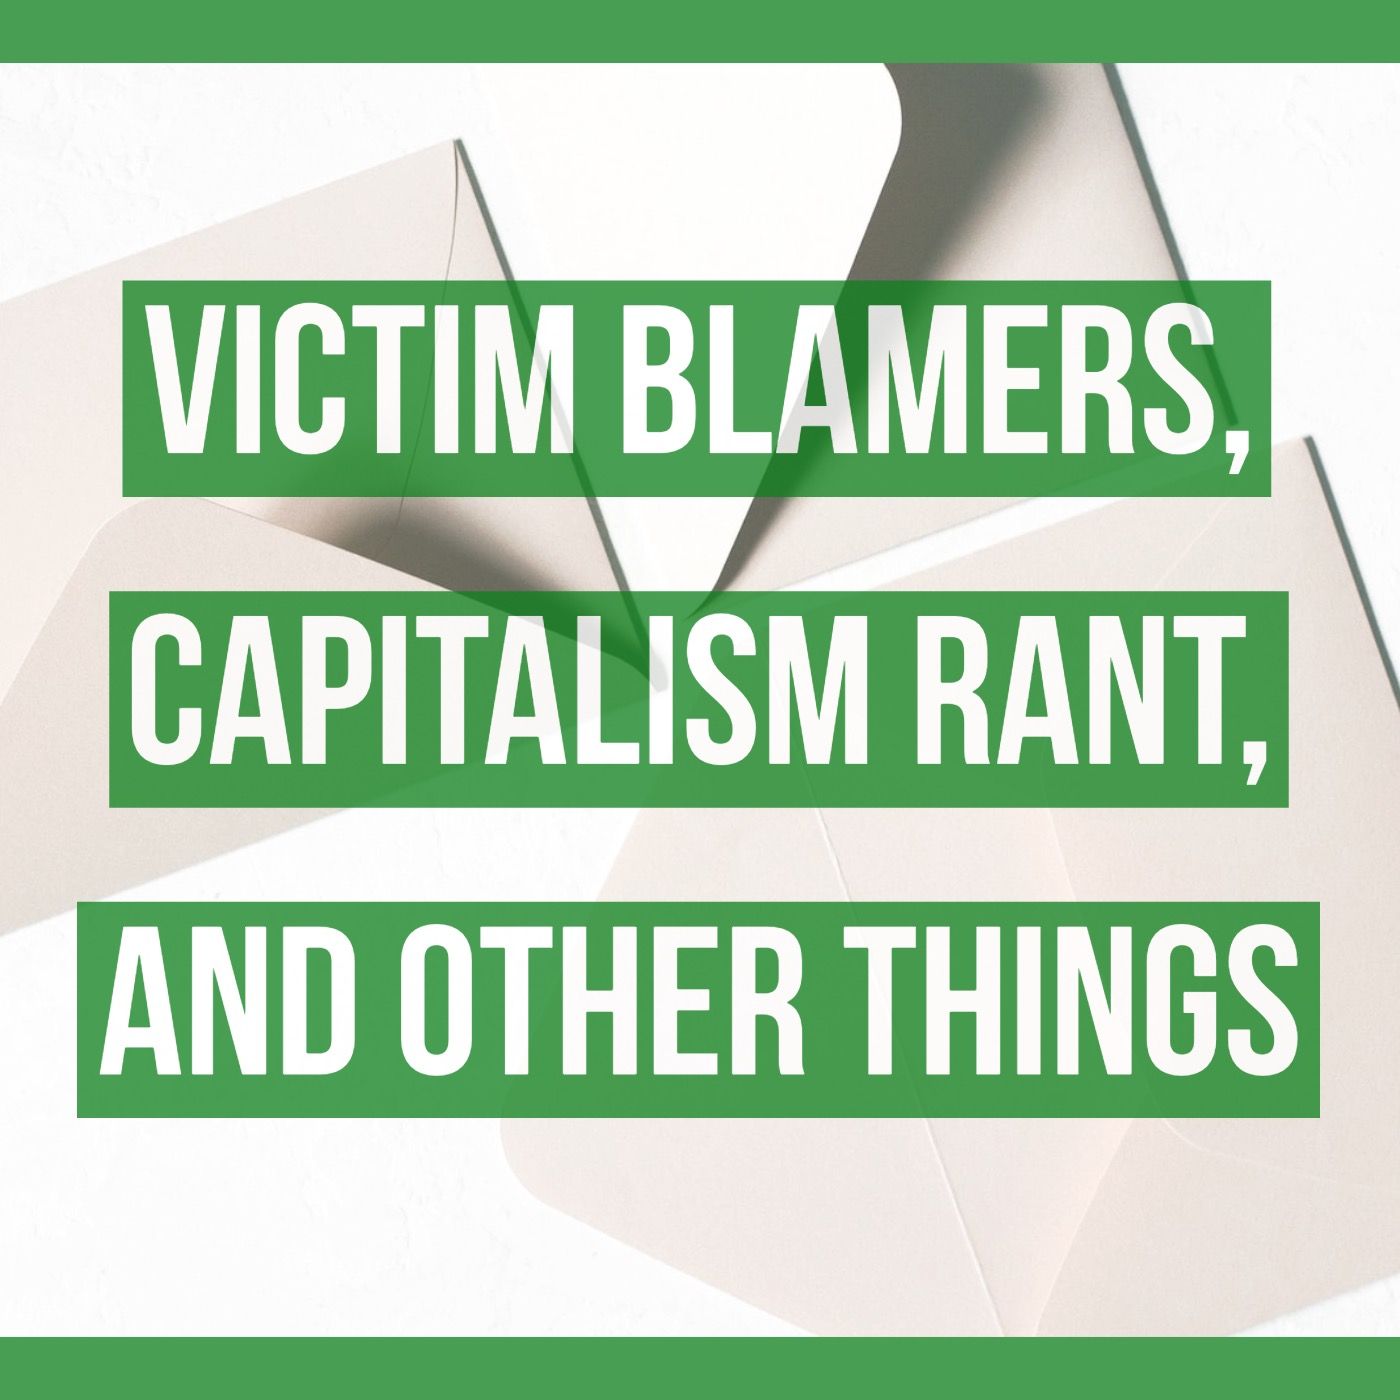 Victim blamers, capitalism rant, and other things